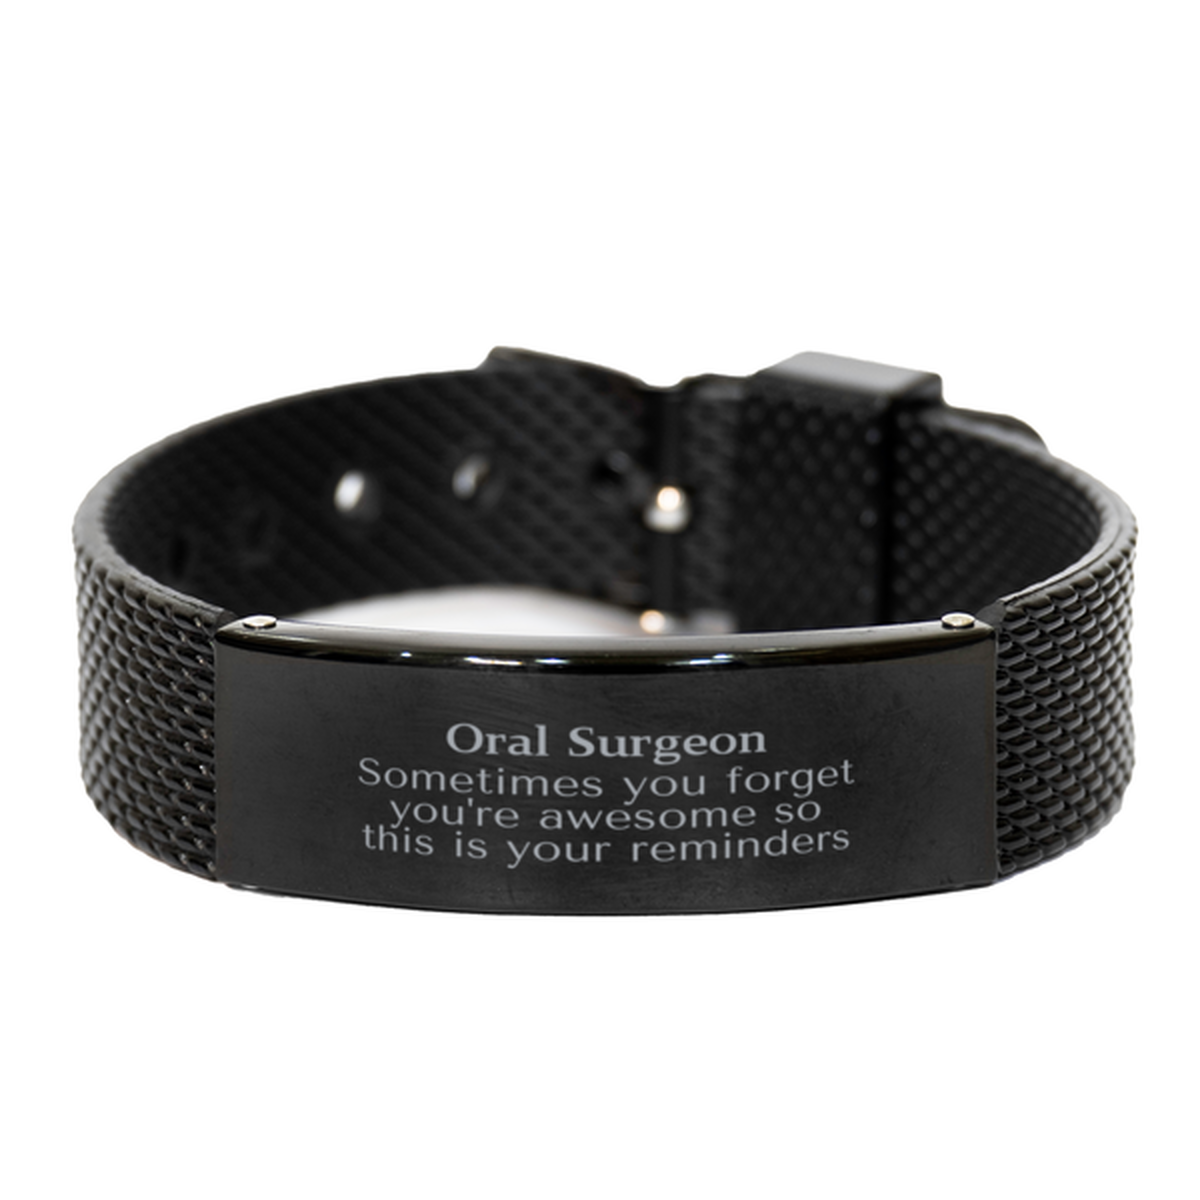 Sentimental Oral Surgeon Black Shark Mesh Bracelet, Oral Surgeon Sometimes you forget you're awesome so this is your reminders, Graduation Christmas Birthday Gifts for Oral Surgeon, Men, Women, Coworkers